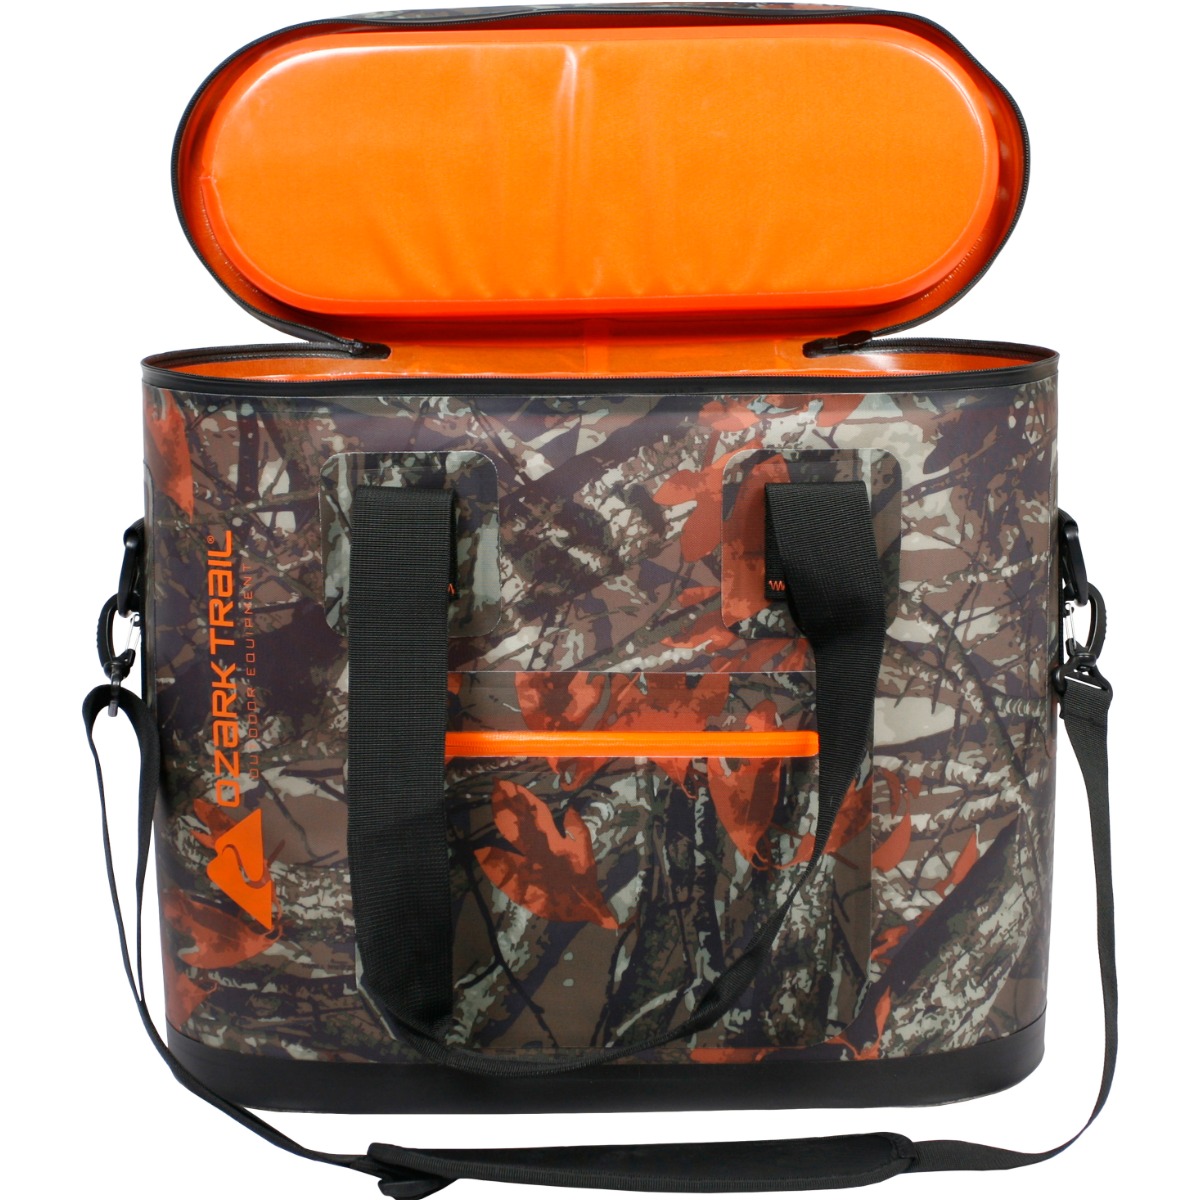 camo Ozark Trail Cooler with top opened